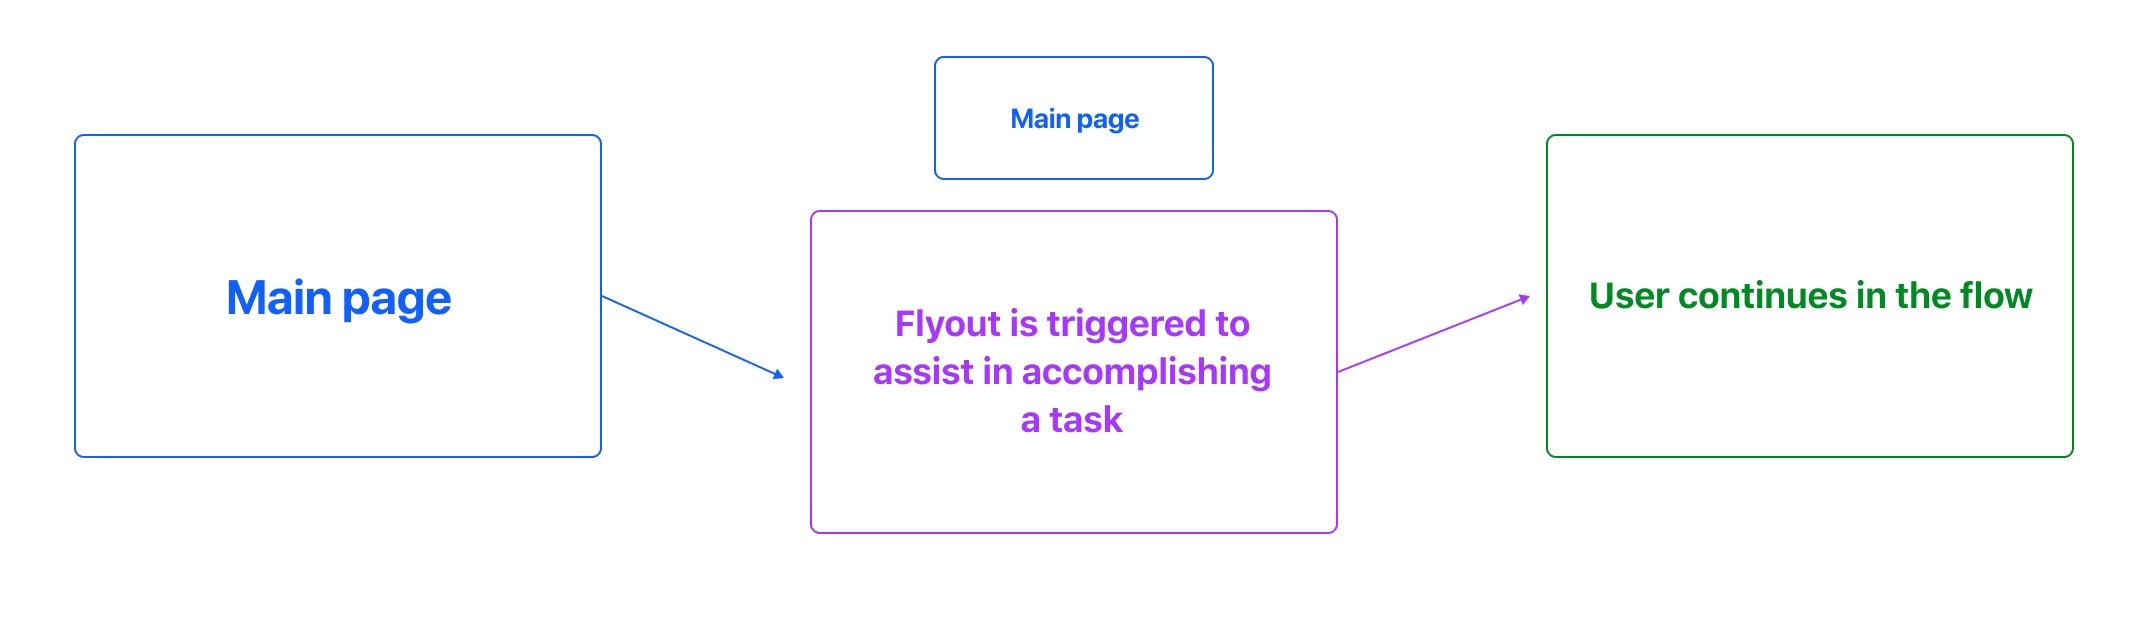 Flyout hierarchy in the user flow